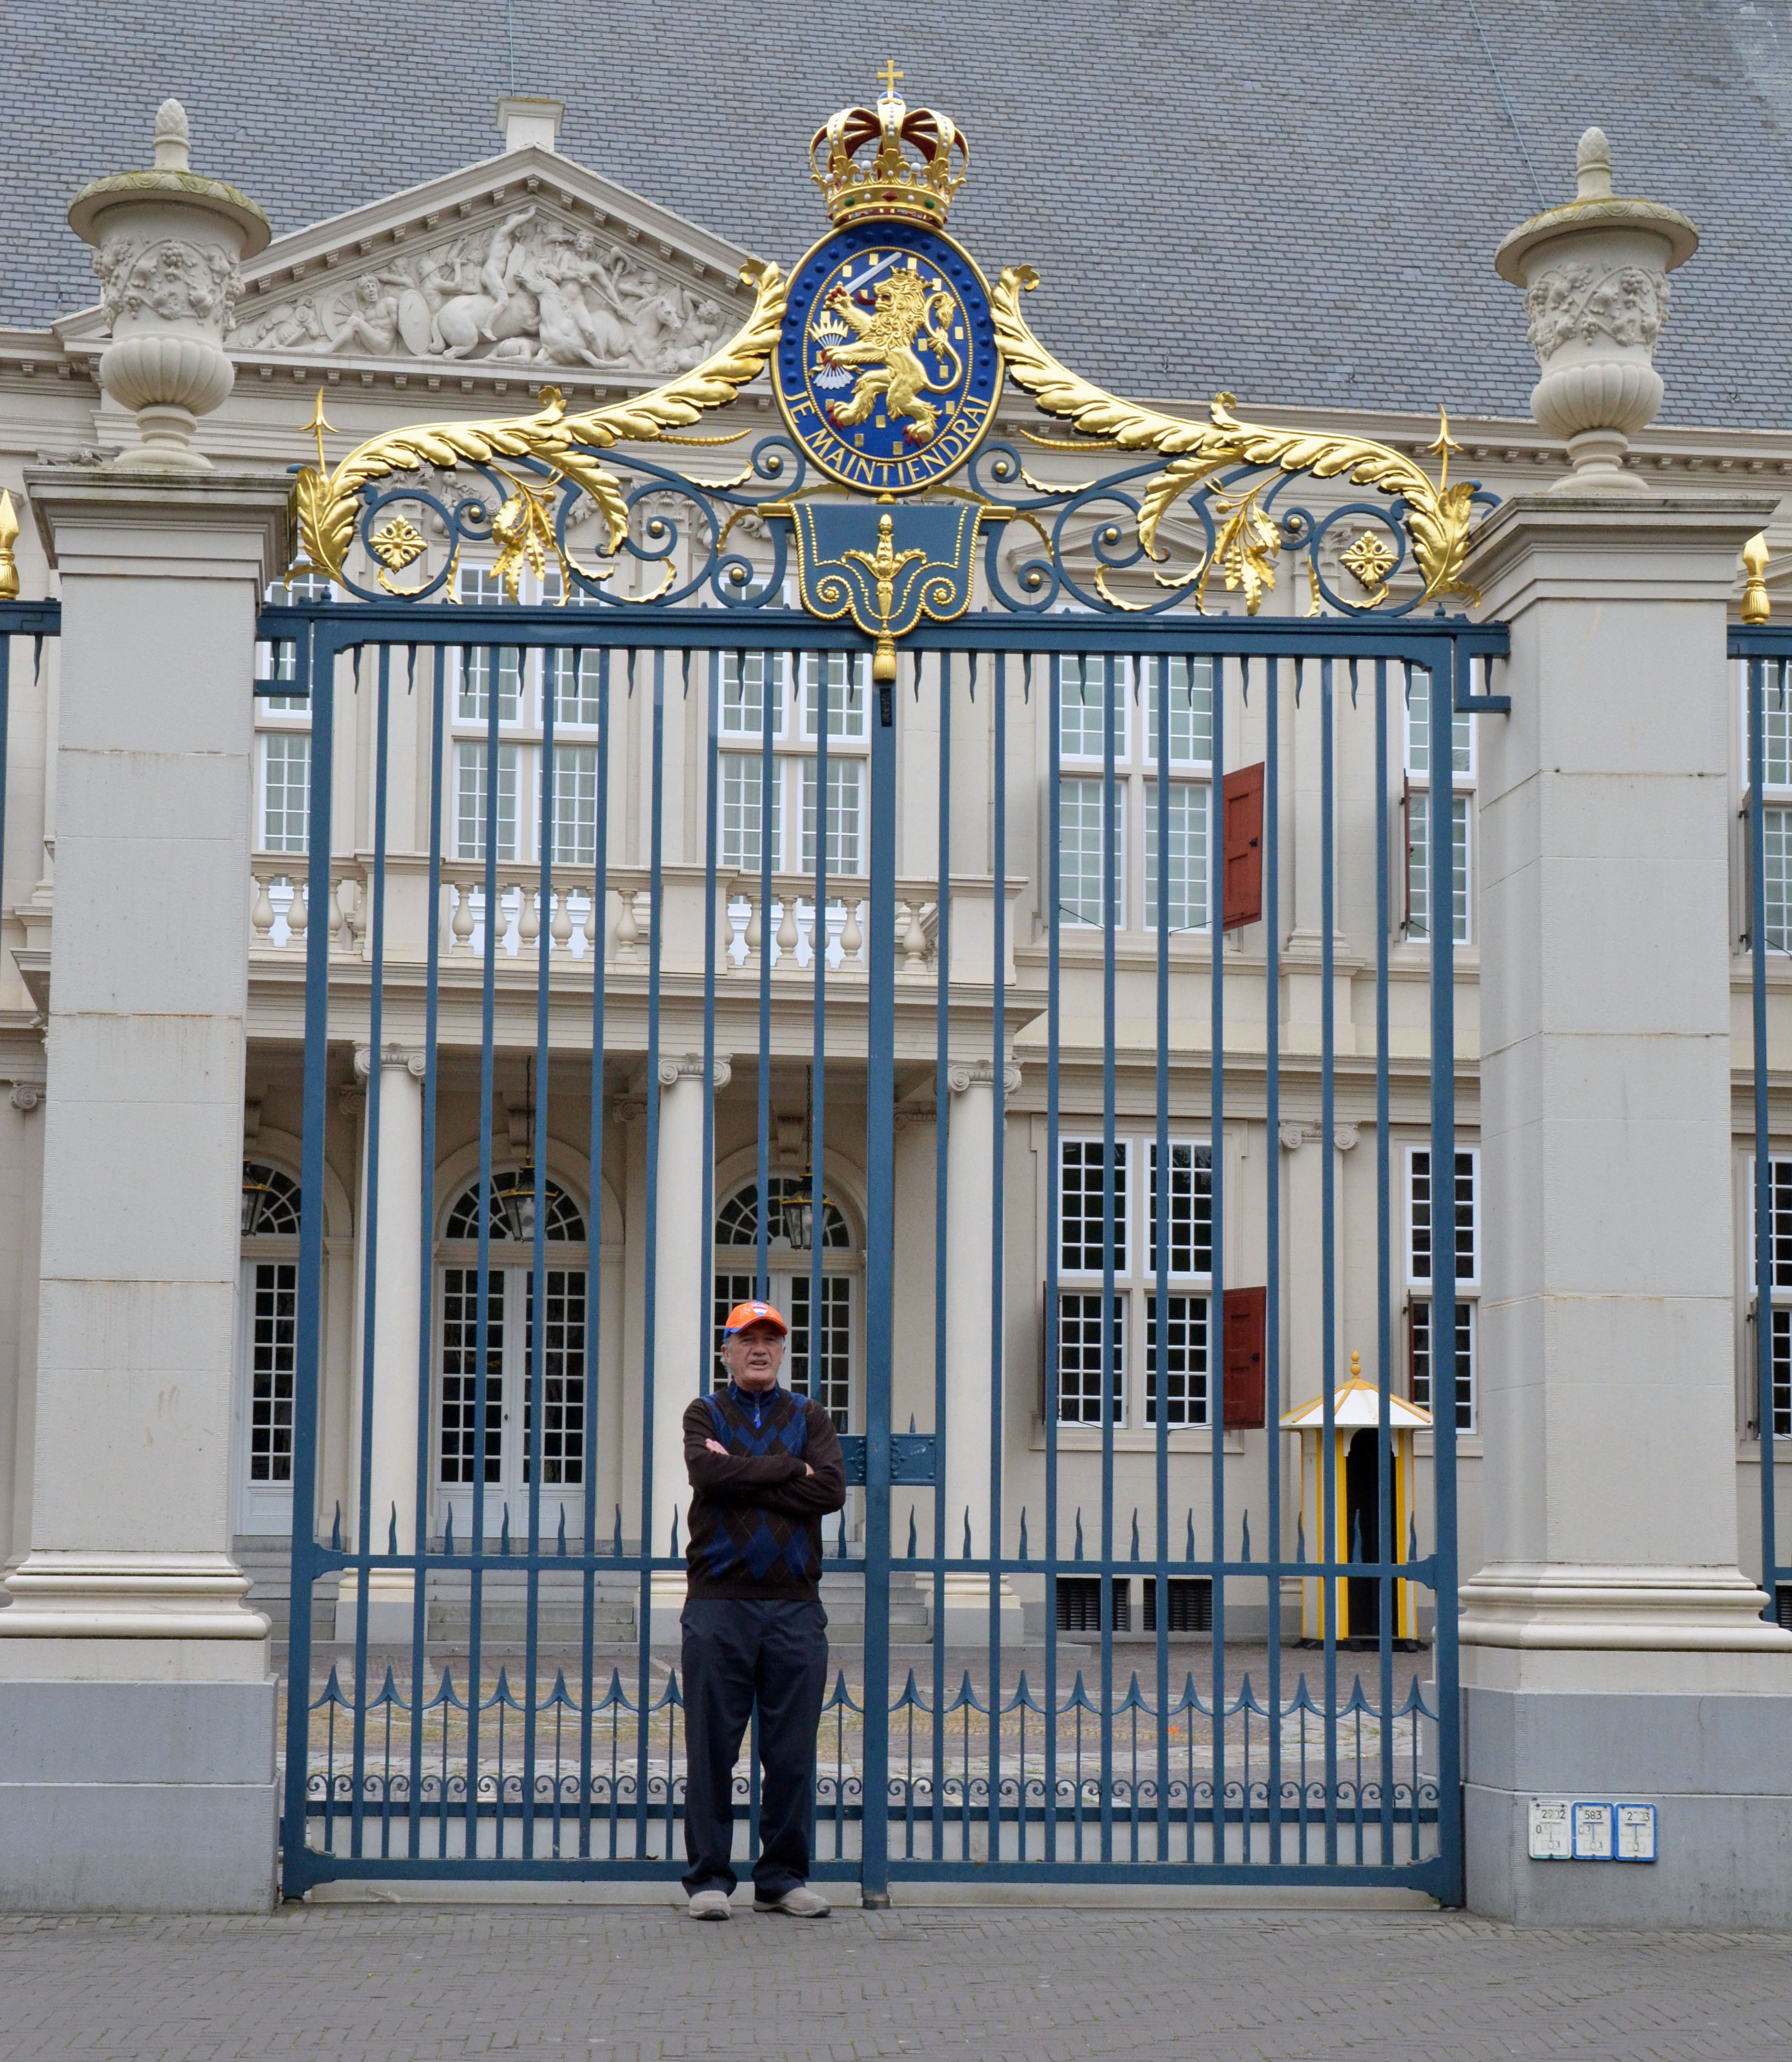 At the Gates of the Noordeinde Palace, The Hague